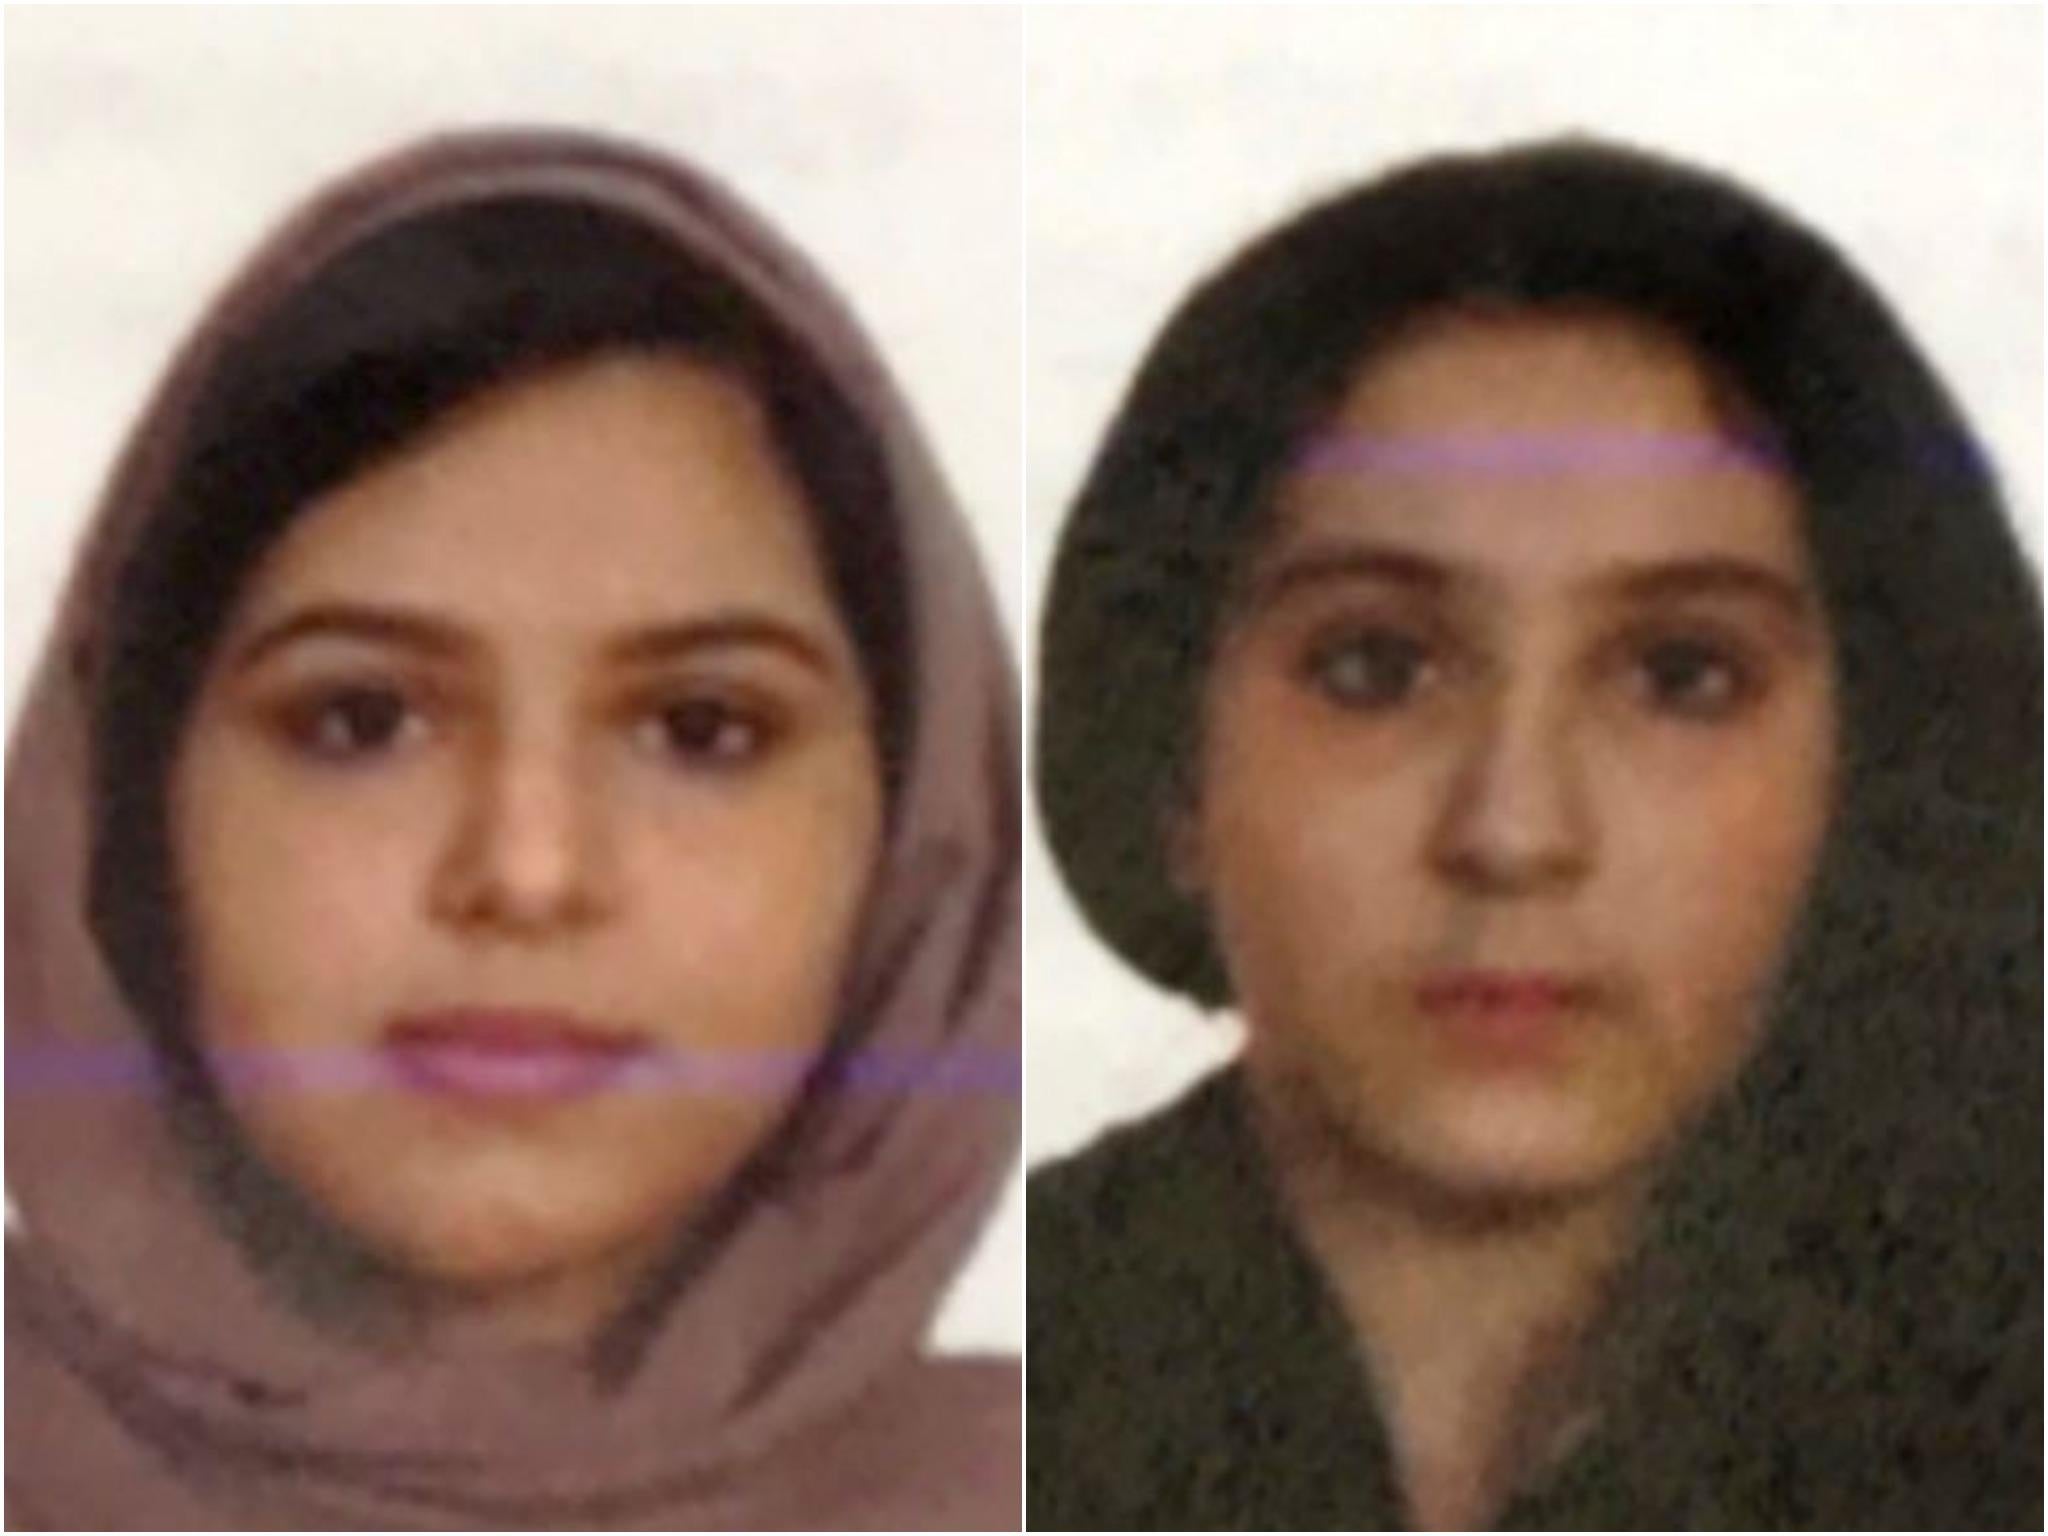 The bodies of Rotana Farea, left, and her teenager sister Tala were found tied together in the Hudson river in New York